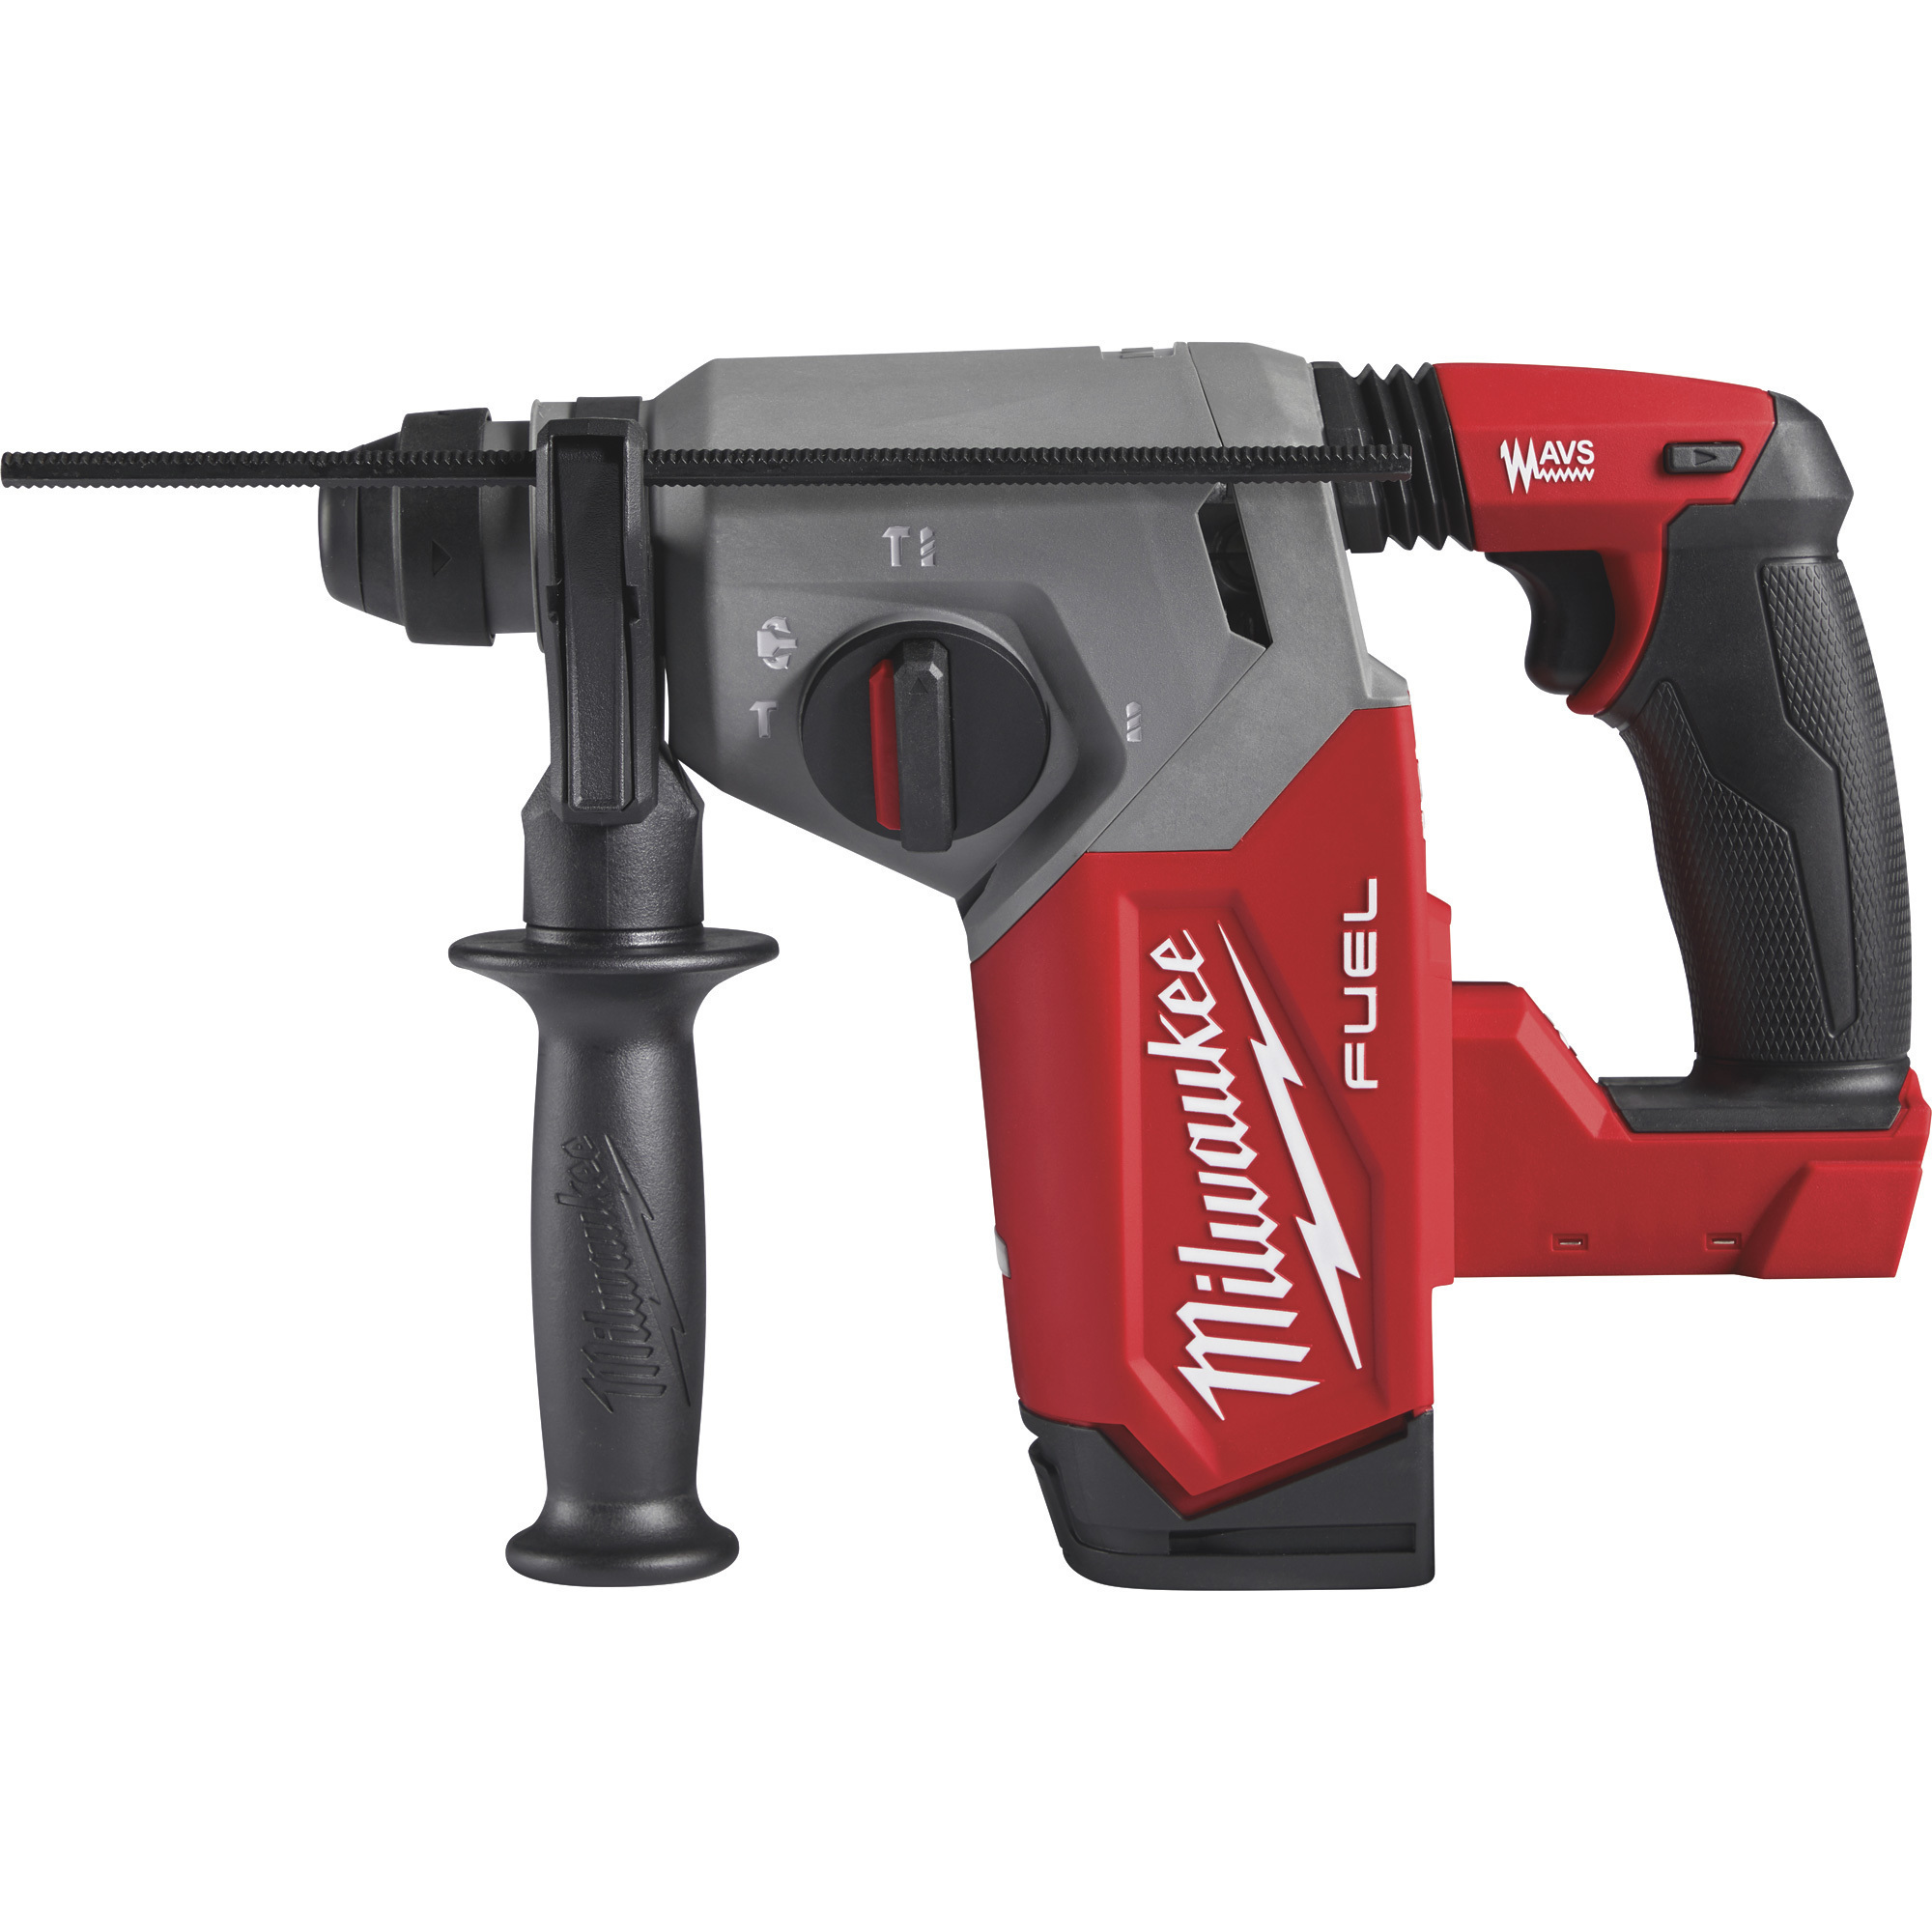 Milwaukee M18 FUEL SDS Plus Rotary Hammer, Tool Only, 1Inch Chuck, 2 Ft./Lbs., 1330 RPM, 4800 BPM, Model 2912-20